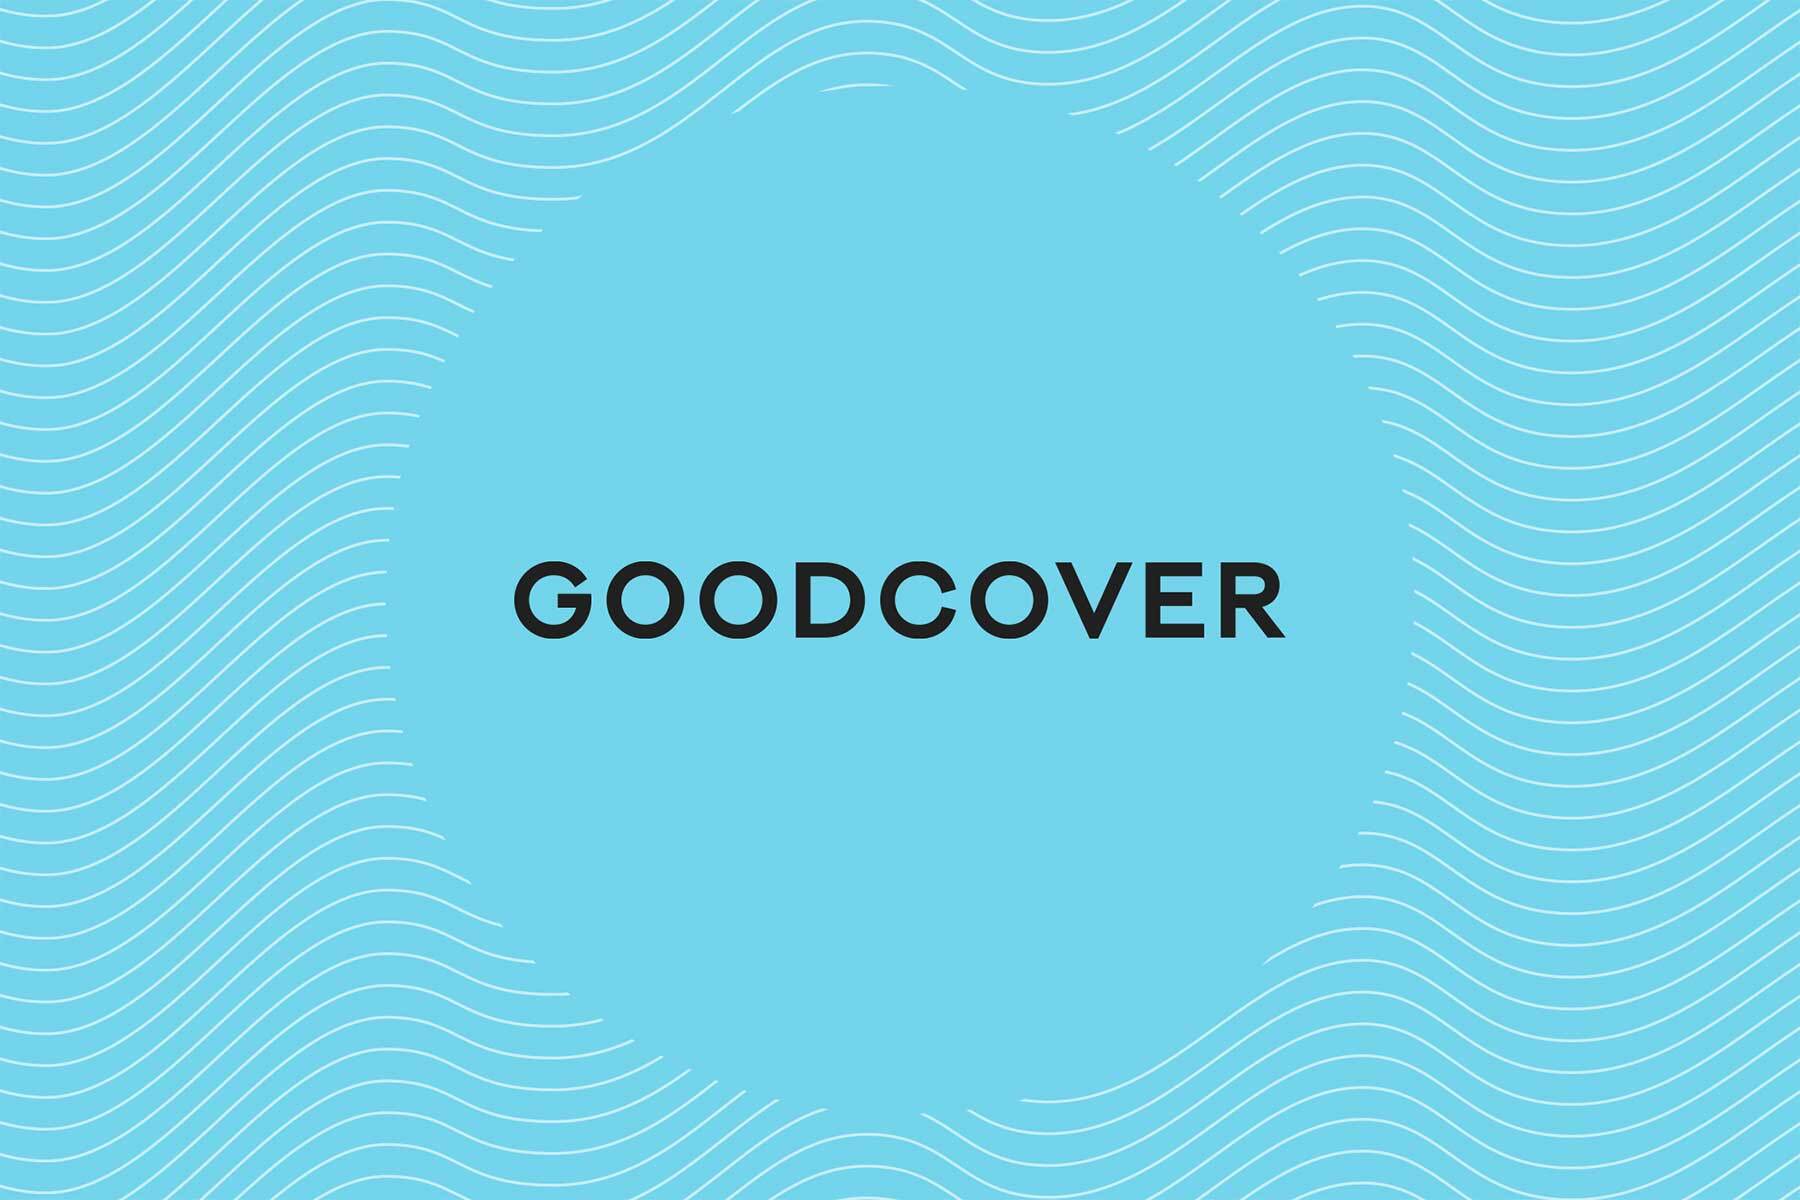 Goodcover's Series A Funding: Accelerating Affordable Renters Insurance Offering in California and Beyond